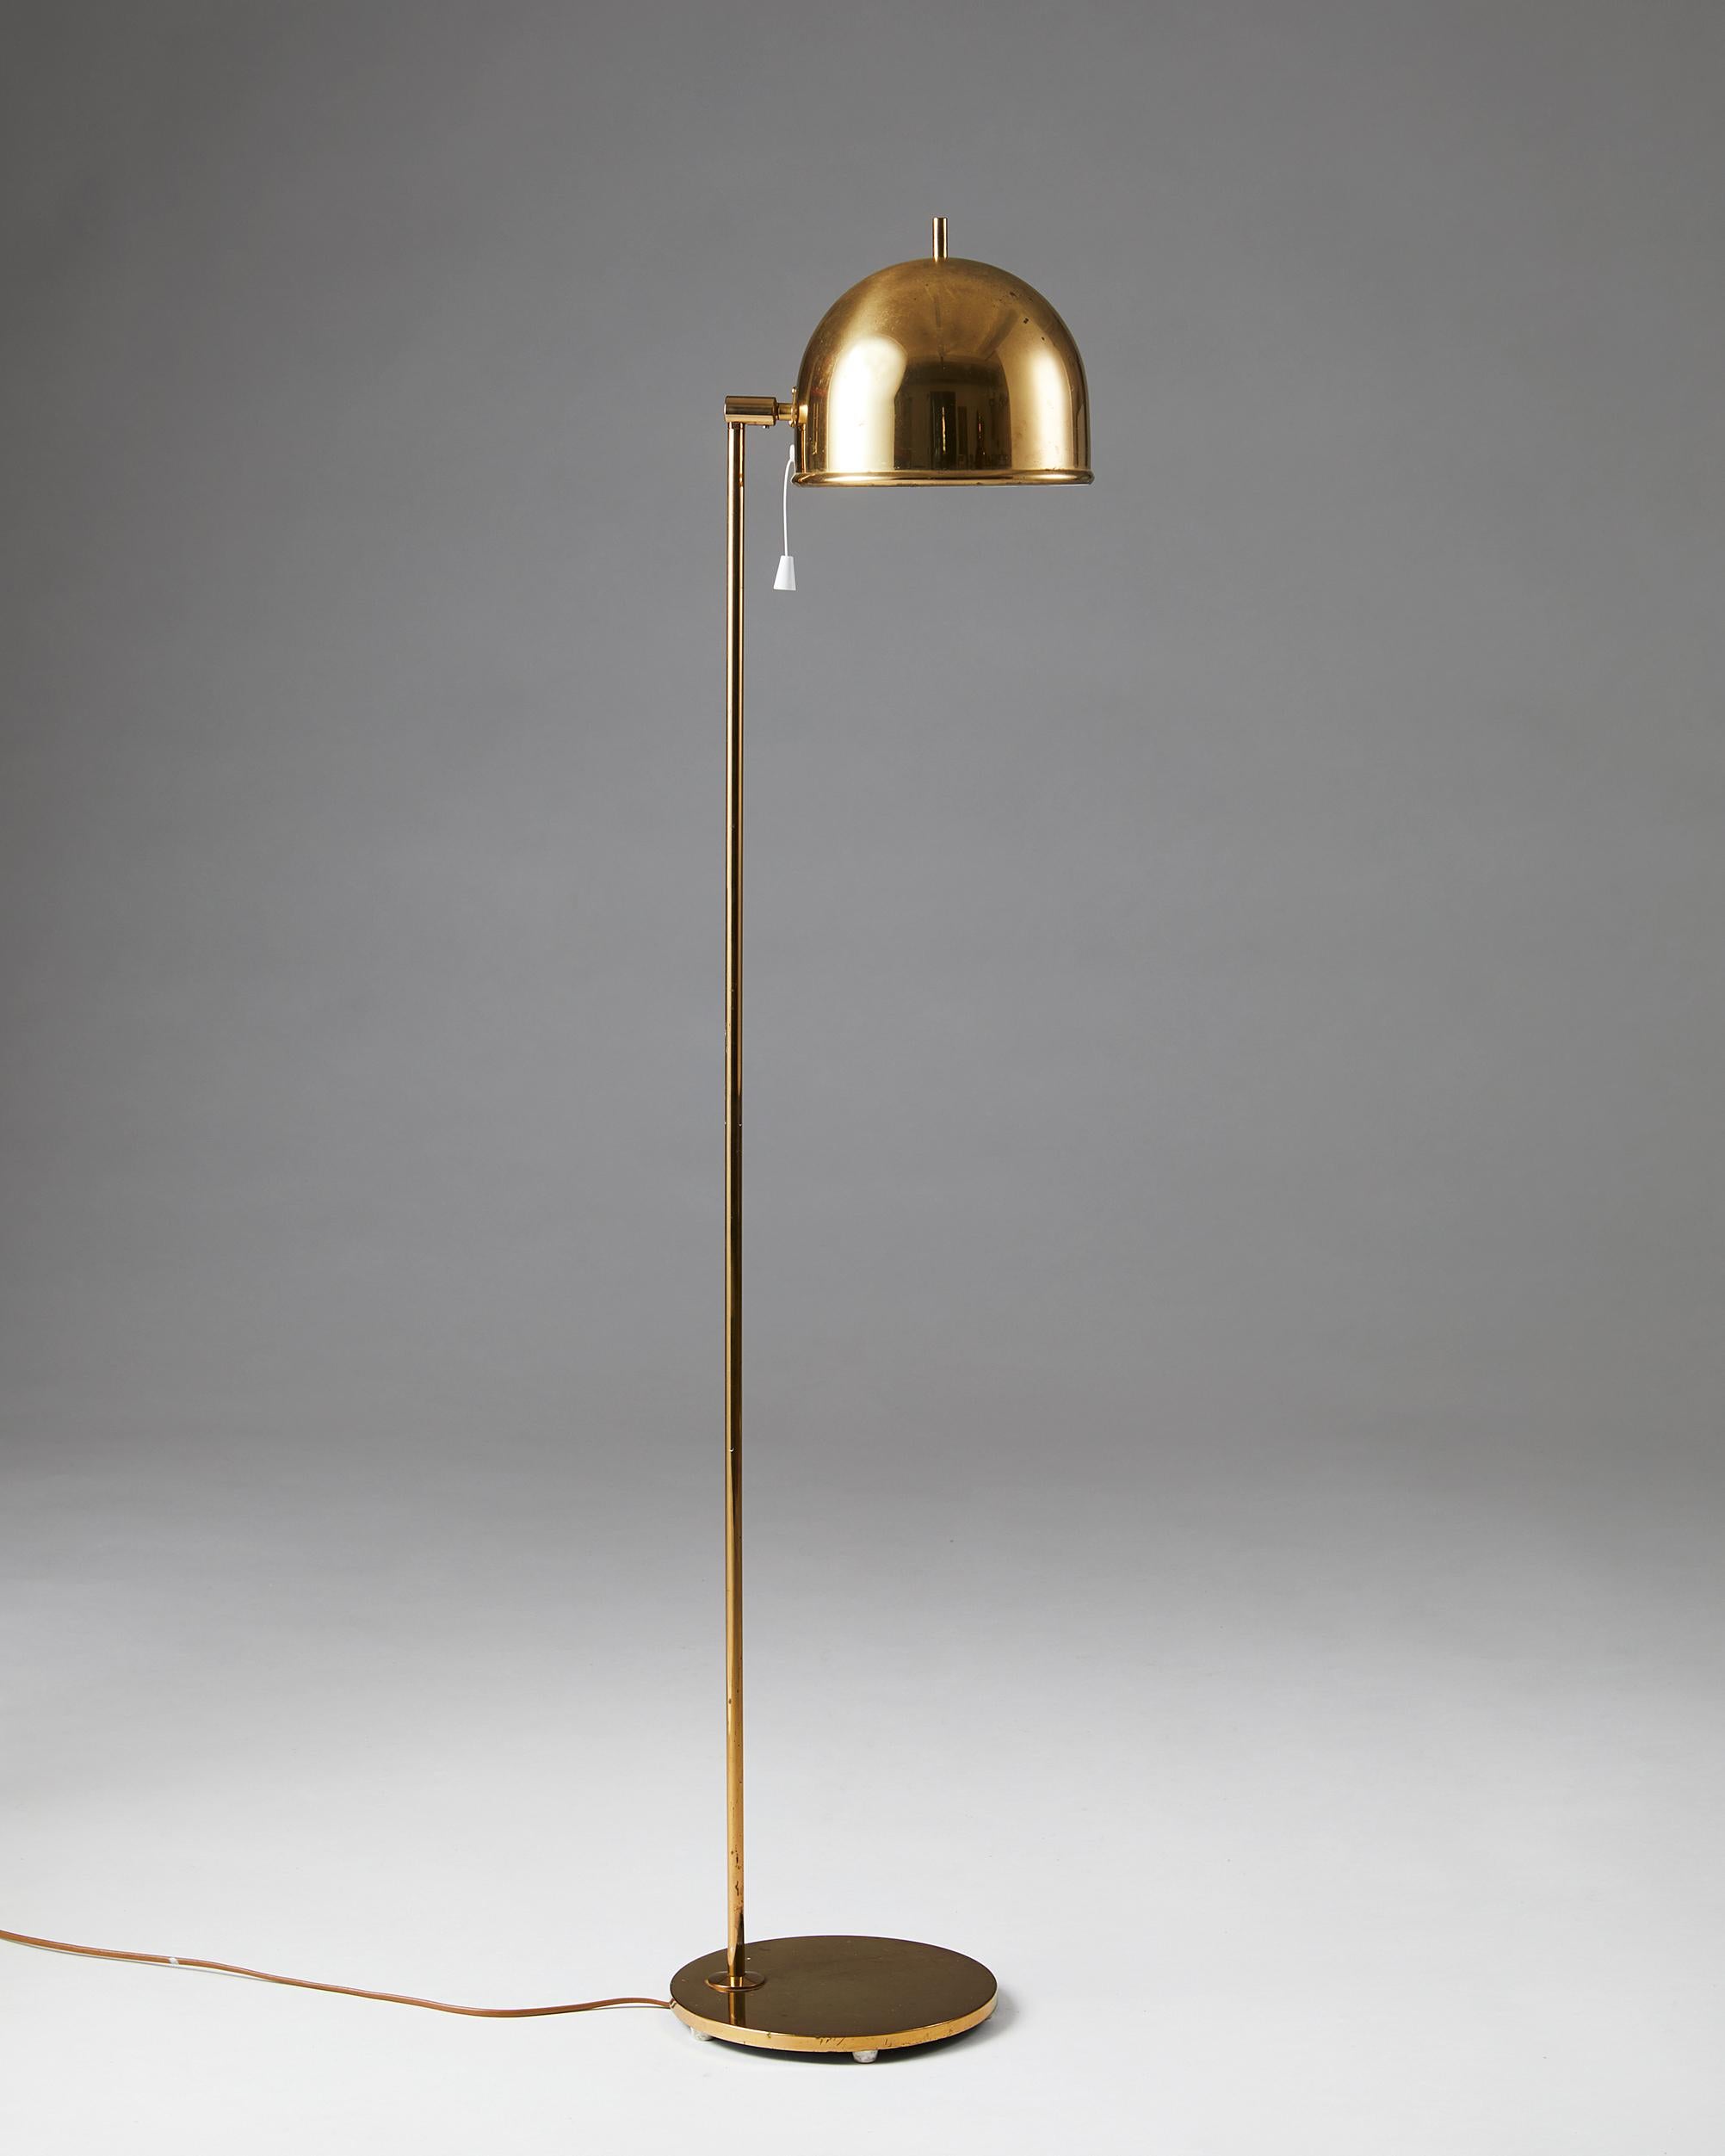 Floor lamp model G-075 designed by Eje Ahlgren for Bergboms,
Sweden. 1960s.

Brass.

This floor lamp with fully adjustable shade was manufactured in brass by Bergboms and designed by Eje Ahlgren. The protruding brass rod at the top of the shade is